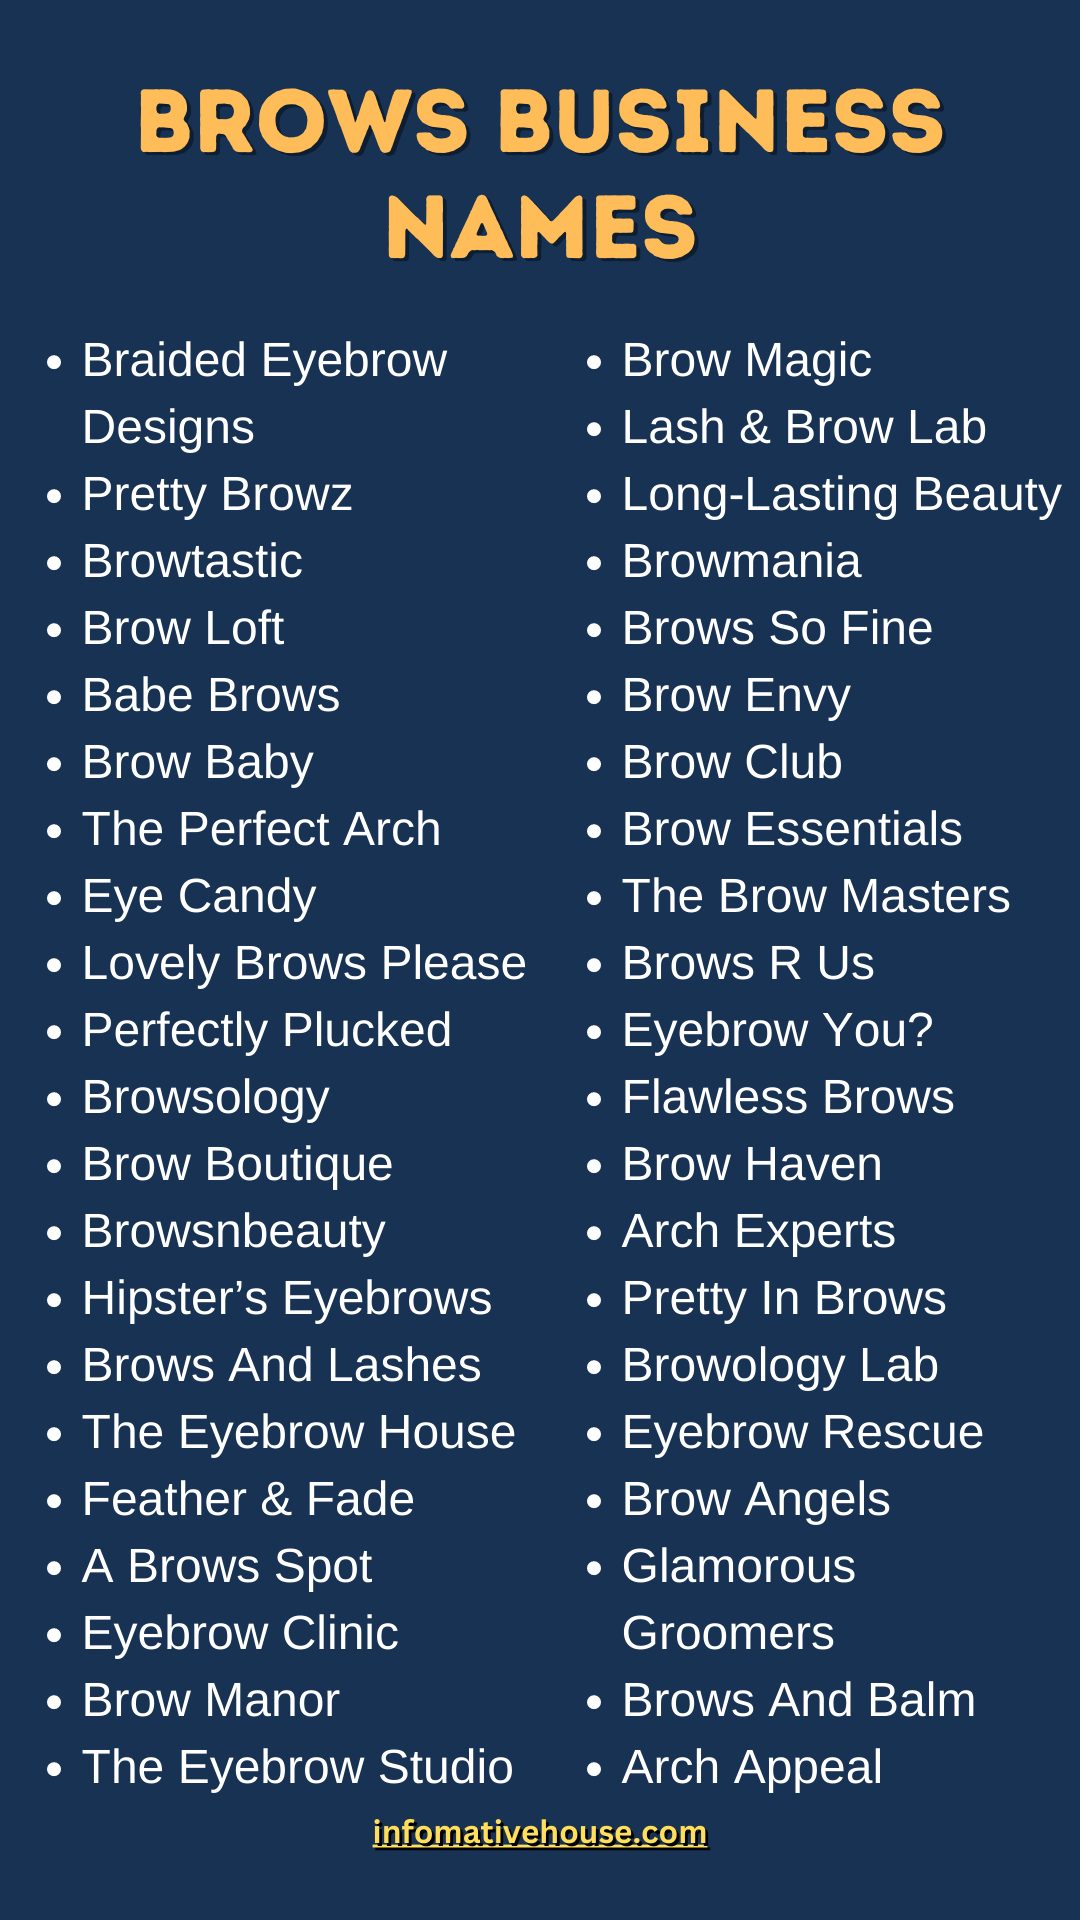 Brows Business Names